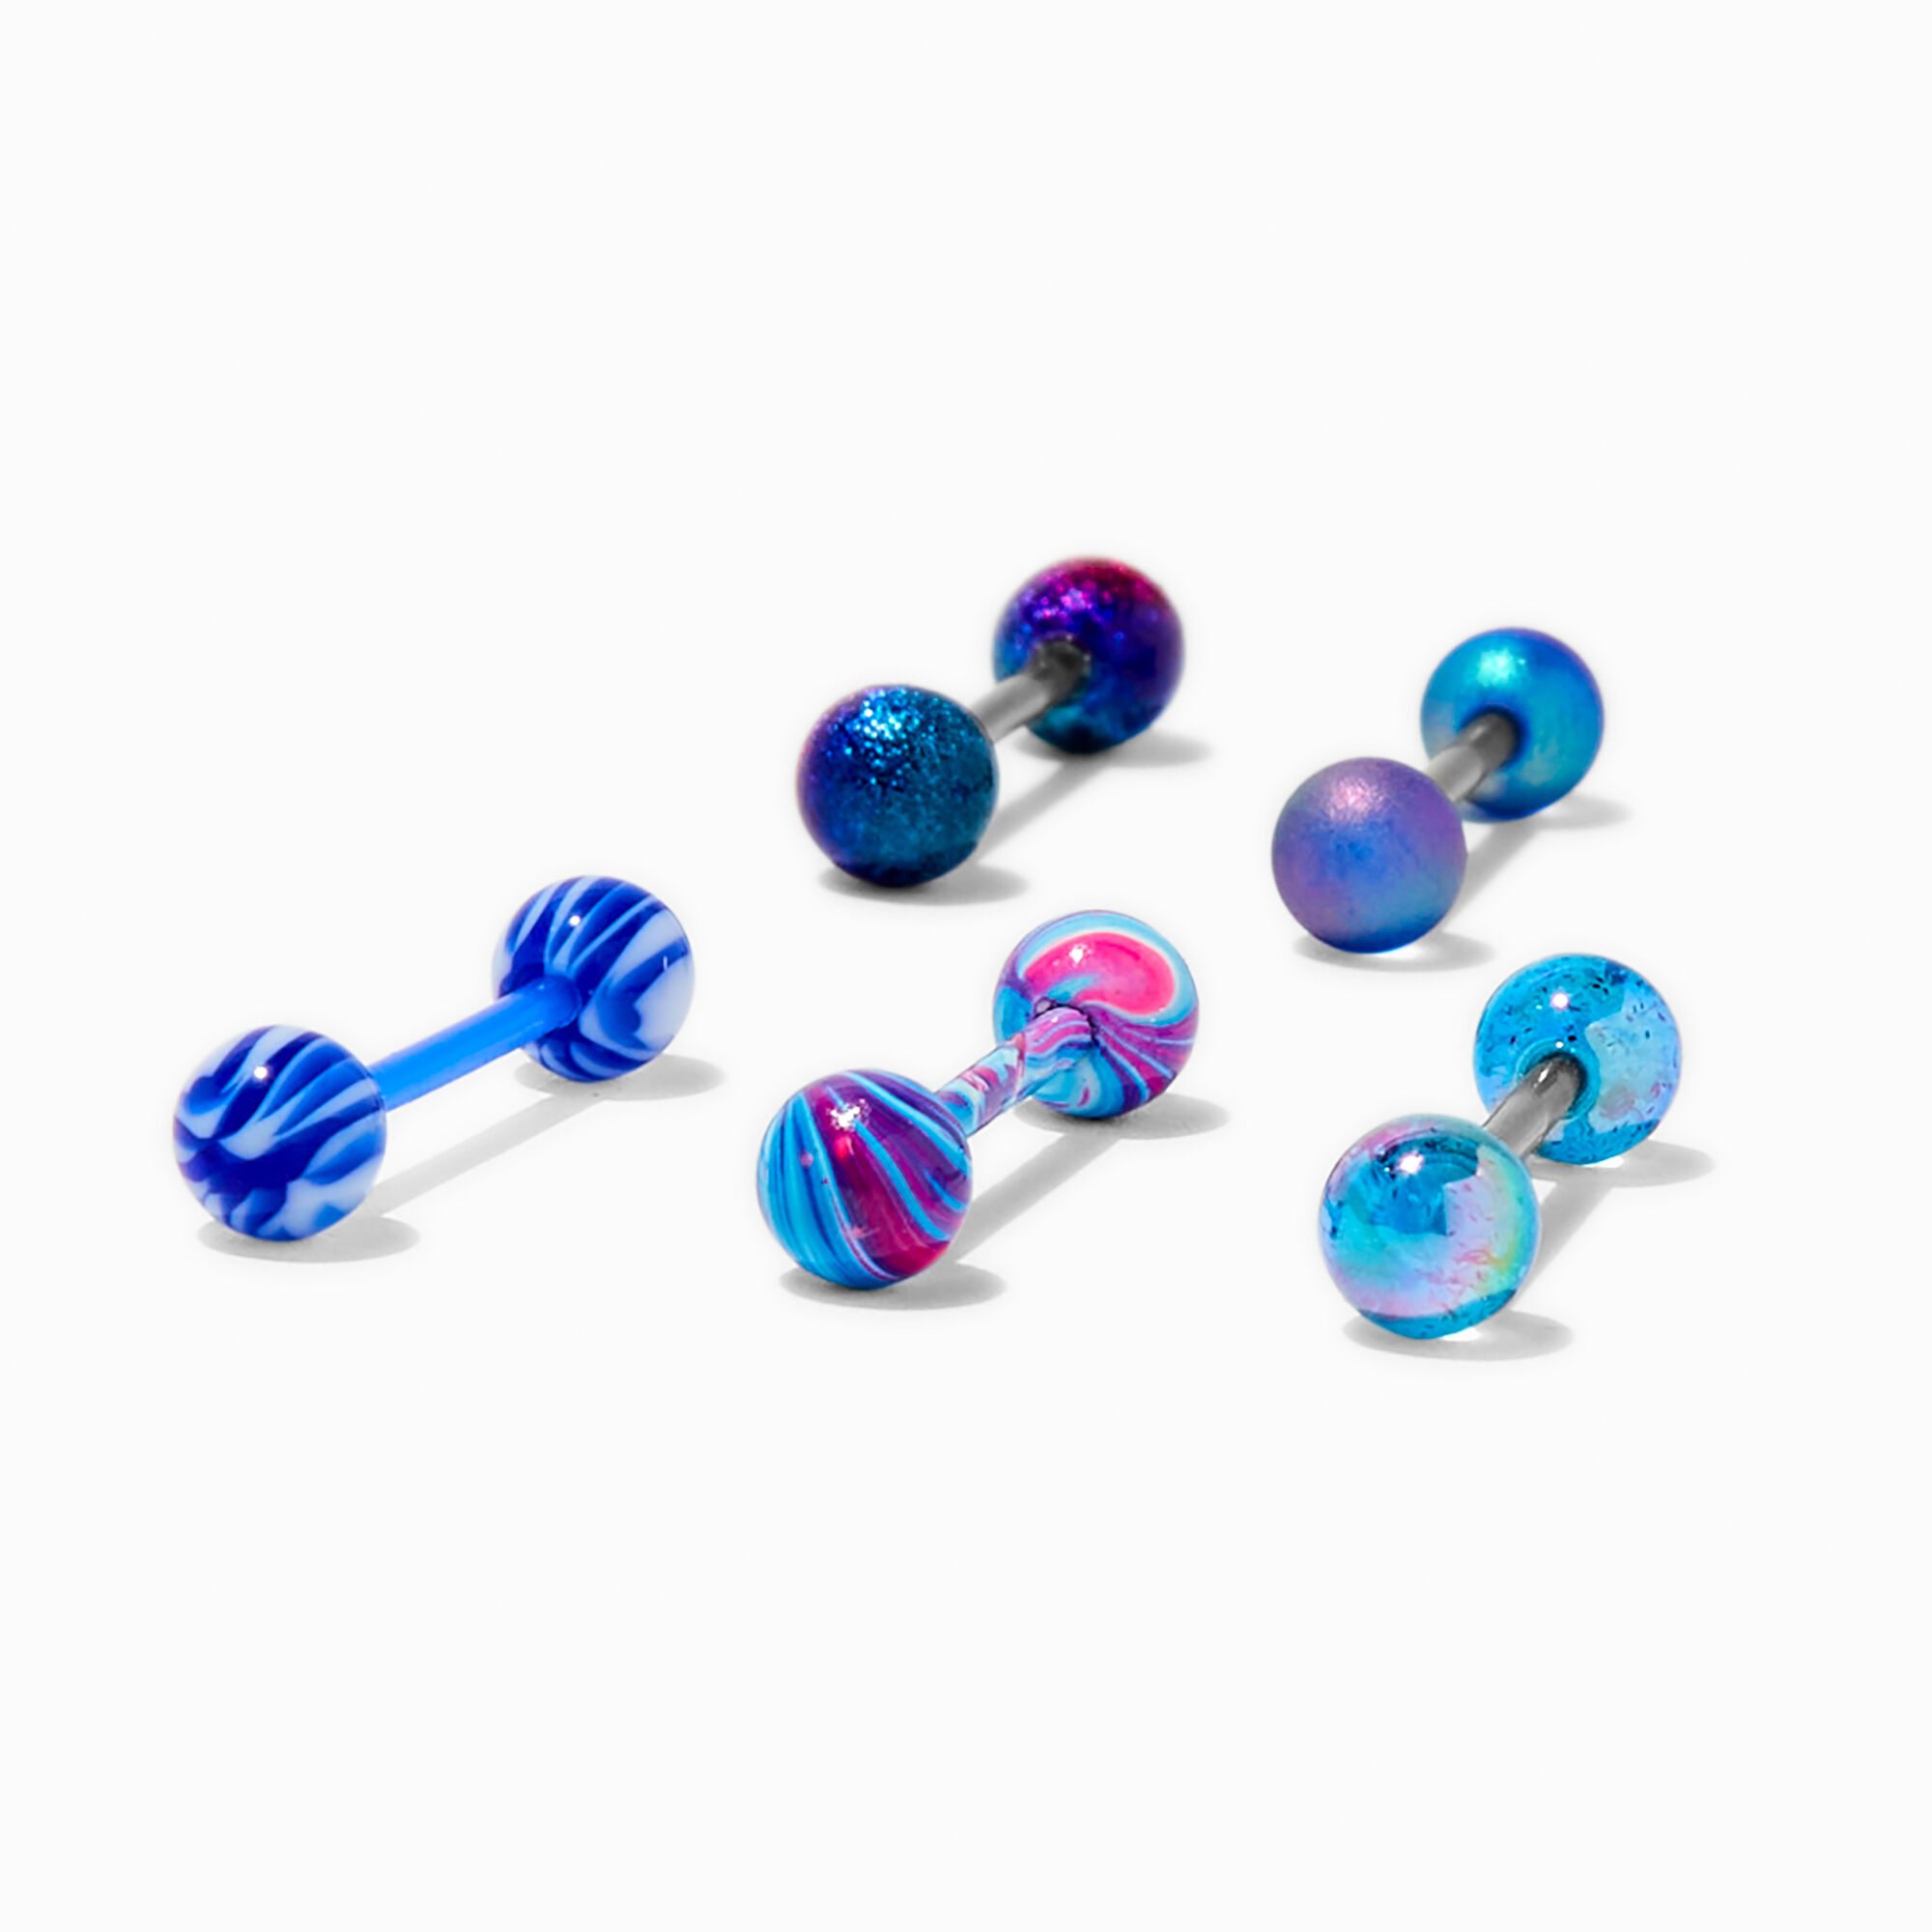 View Claires Aqua Swirl Glitter 14G Barbell Tongue Rings 5 Pack Silver information